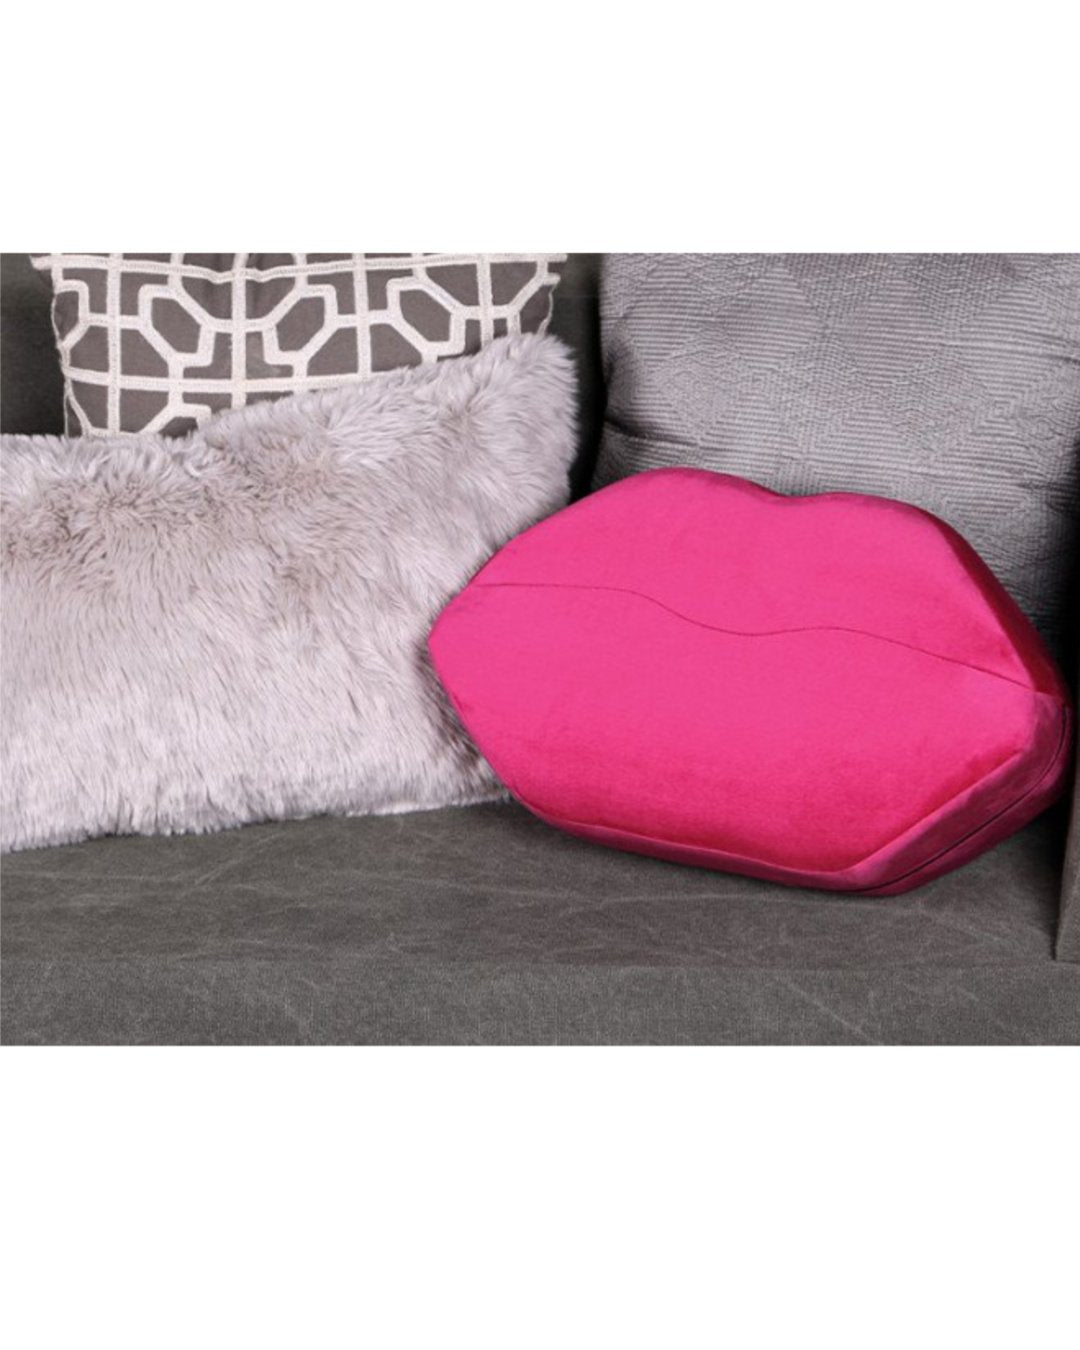 Liberator Kiss Sex Positioning Wedge Pink Pillow on Couch 